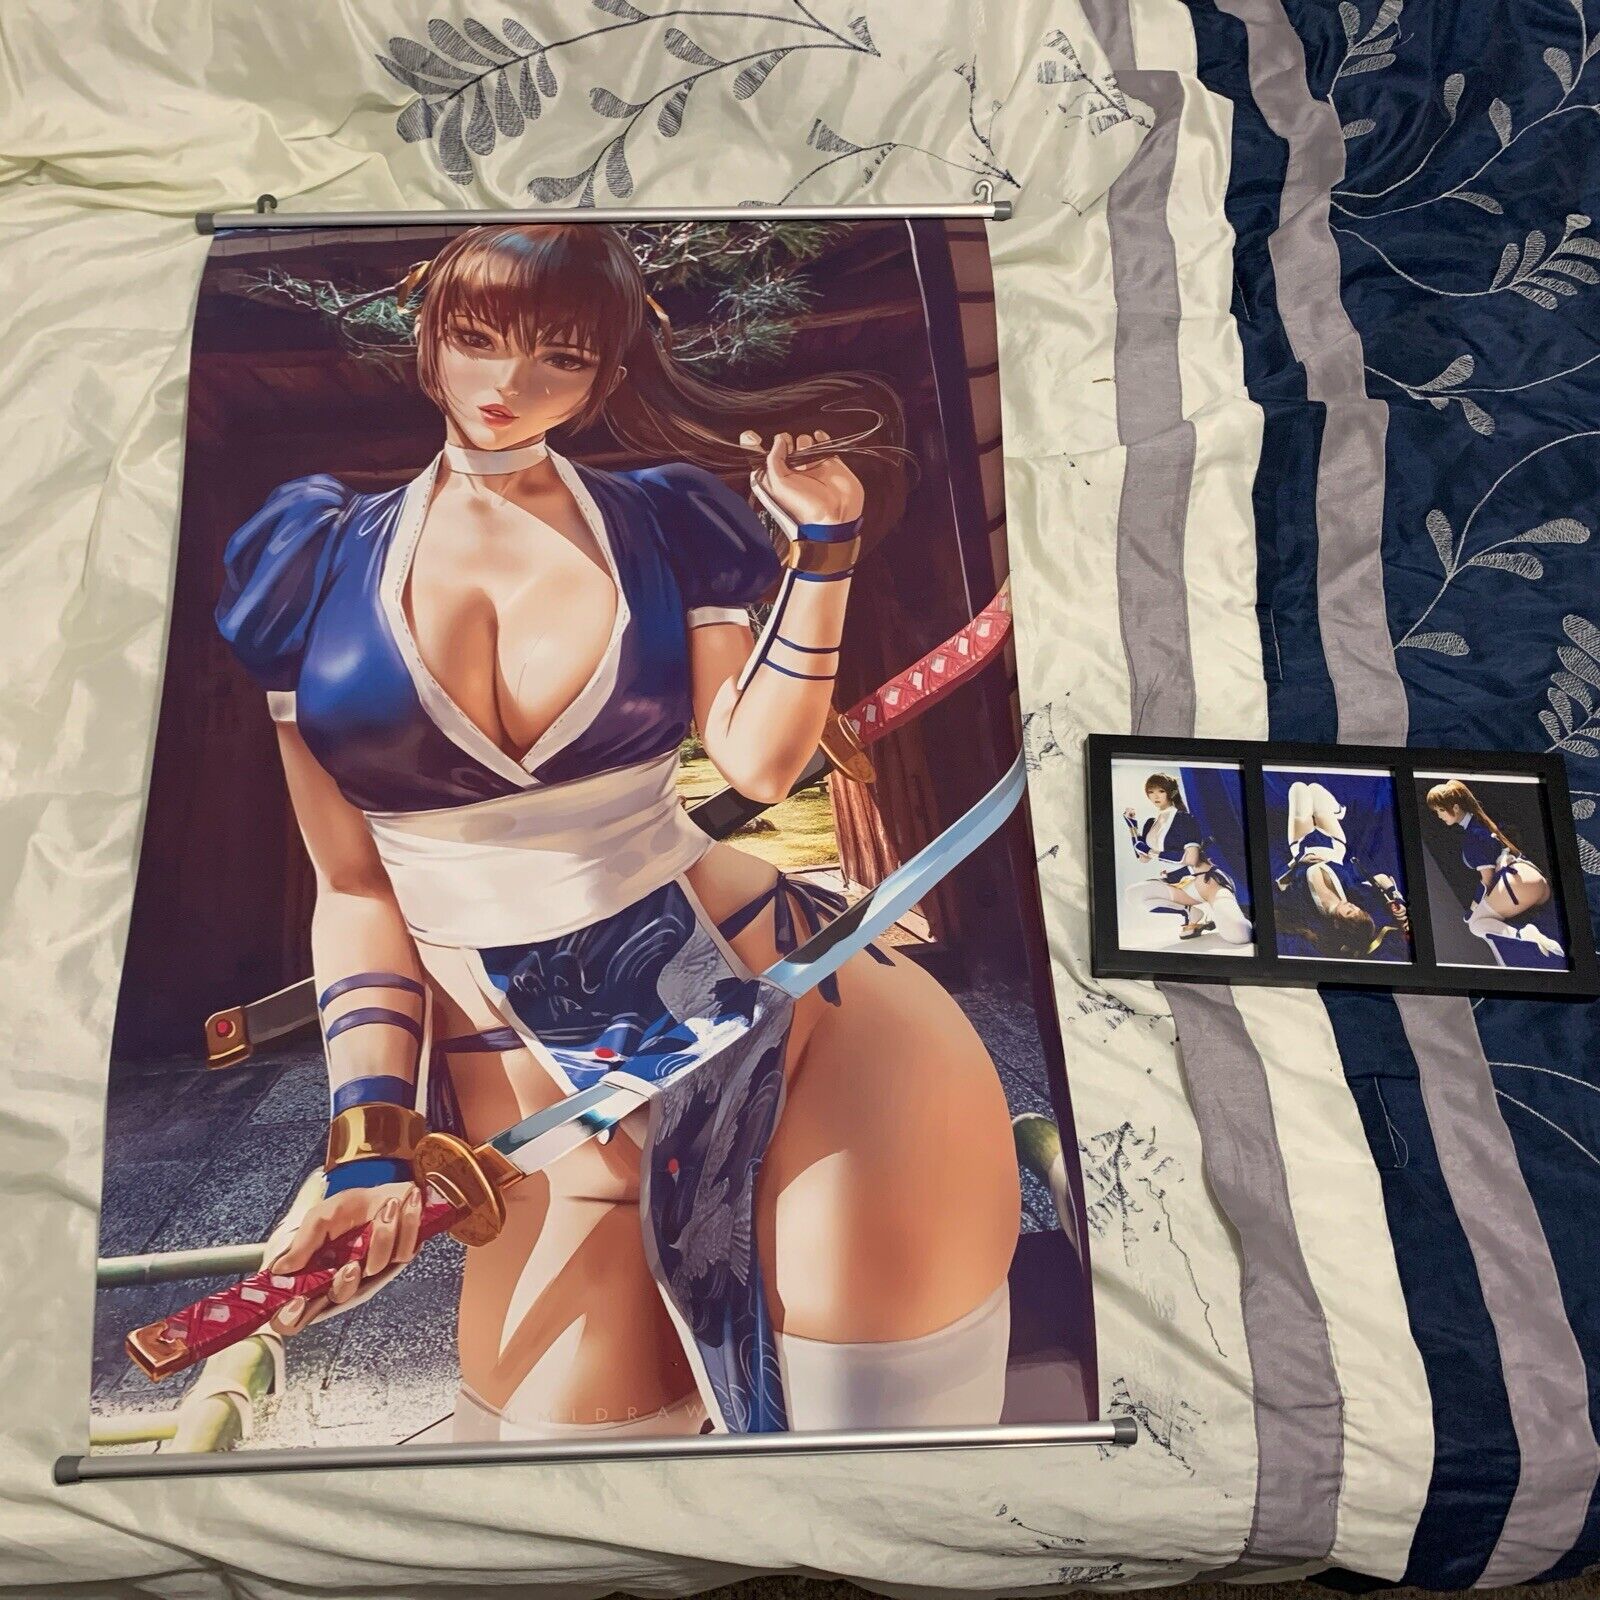 Dead or Alive Kasumi Art Wall Scroll Poster Home Decor 60*90CM + Extras